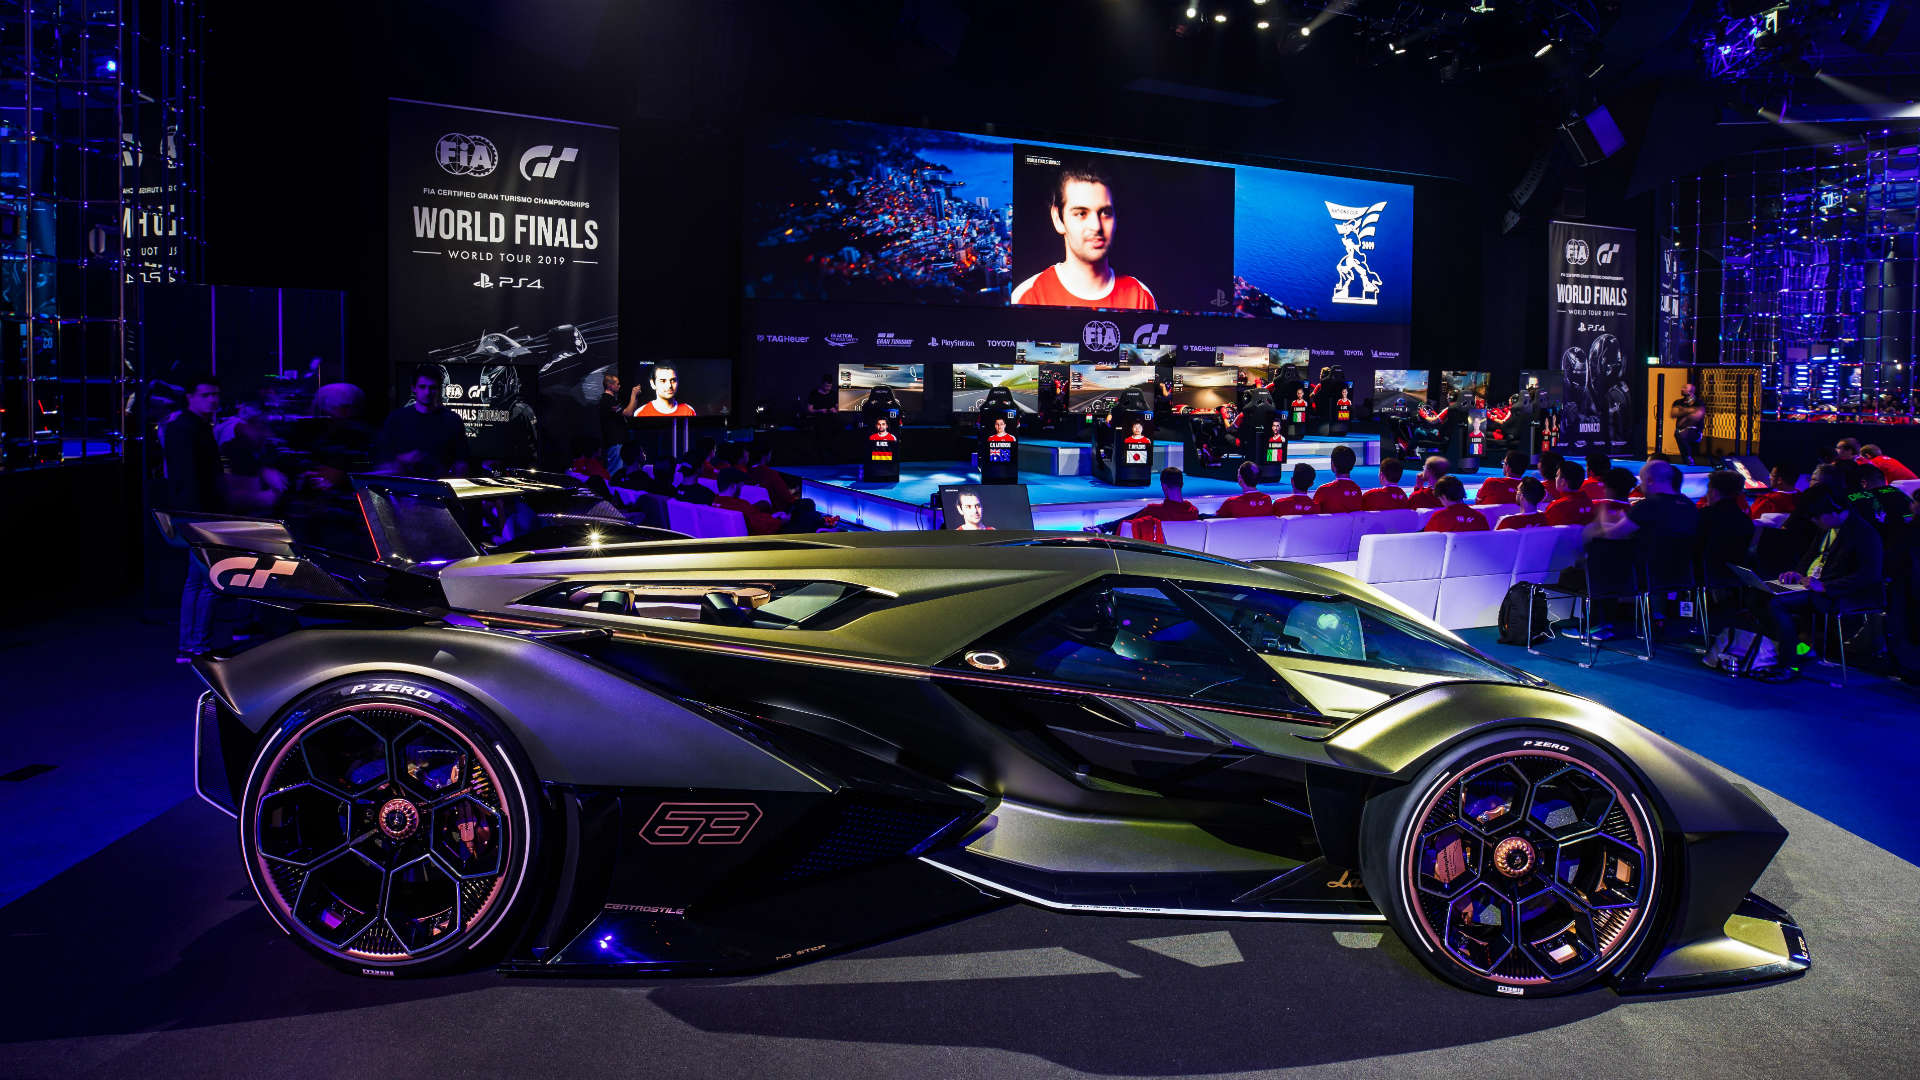 The Lamborghini V12 Vision GT is a hypercar you can actually drive